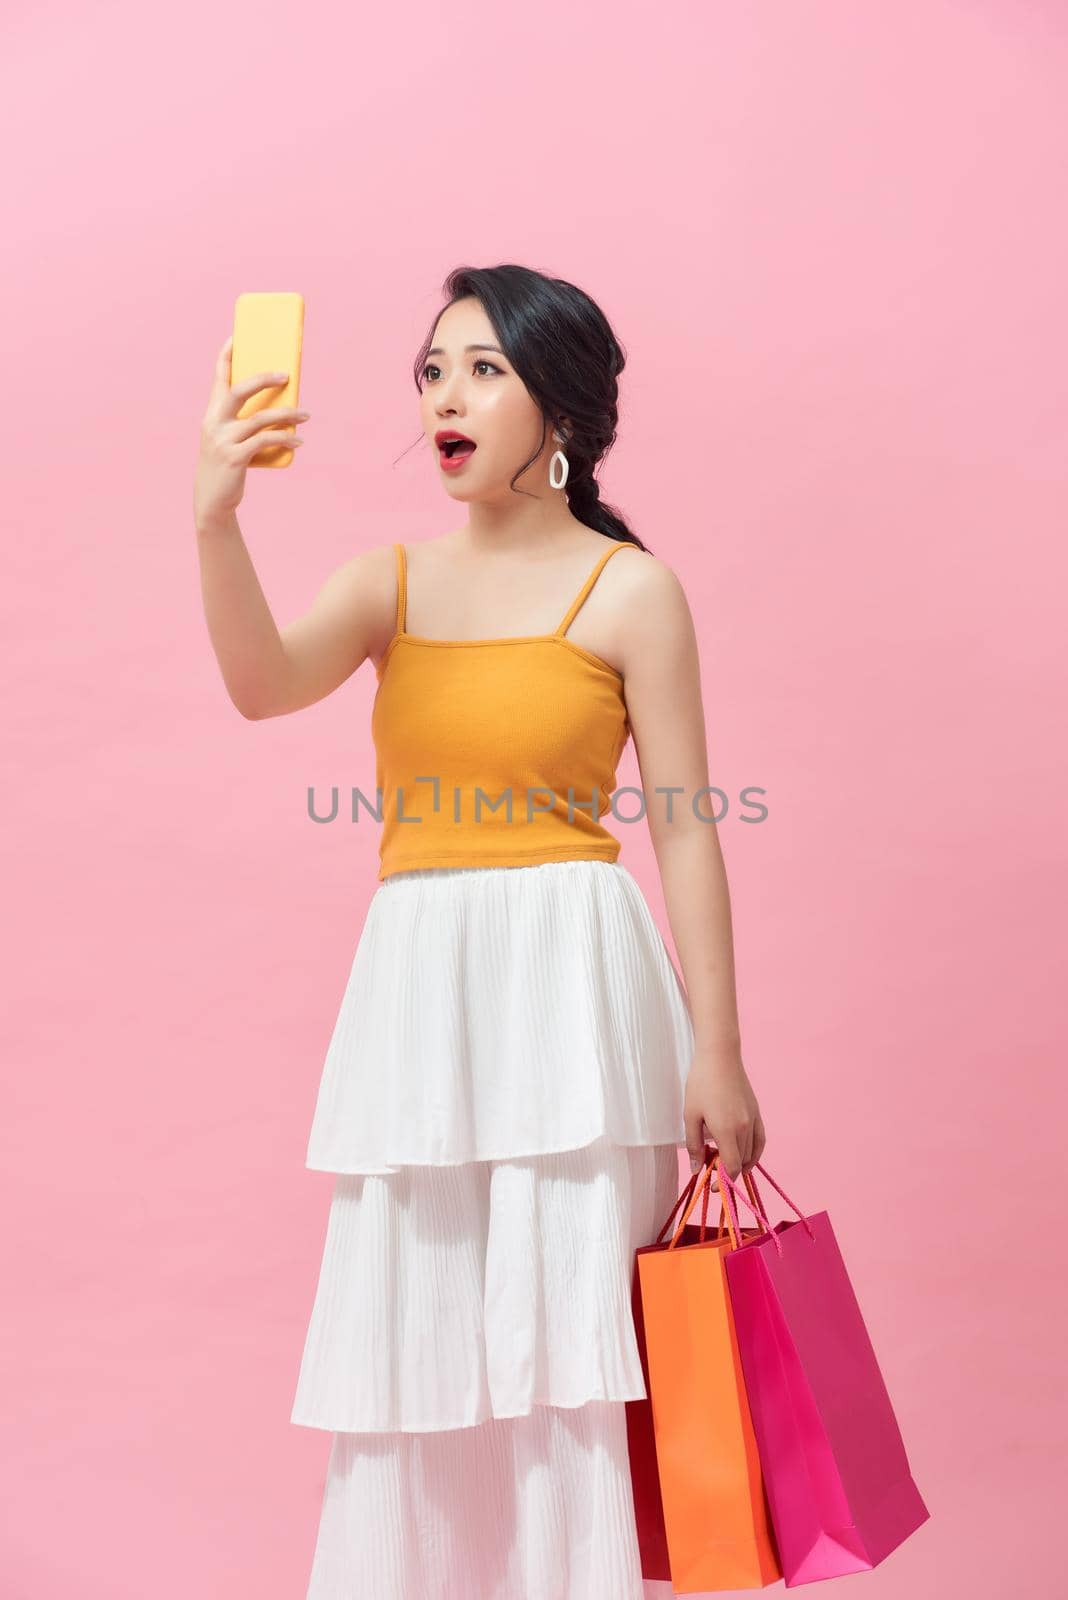 Surprised young woman with mobile phone and shopping bags on color background by makidotvn